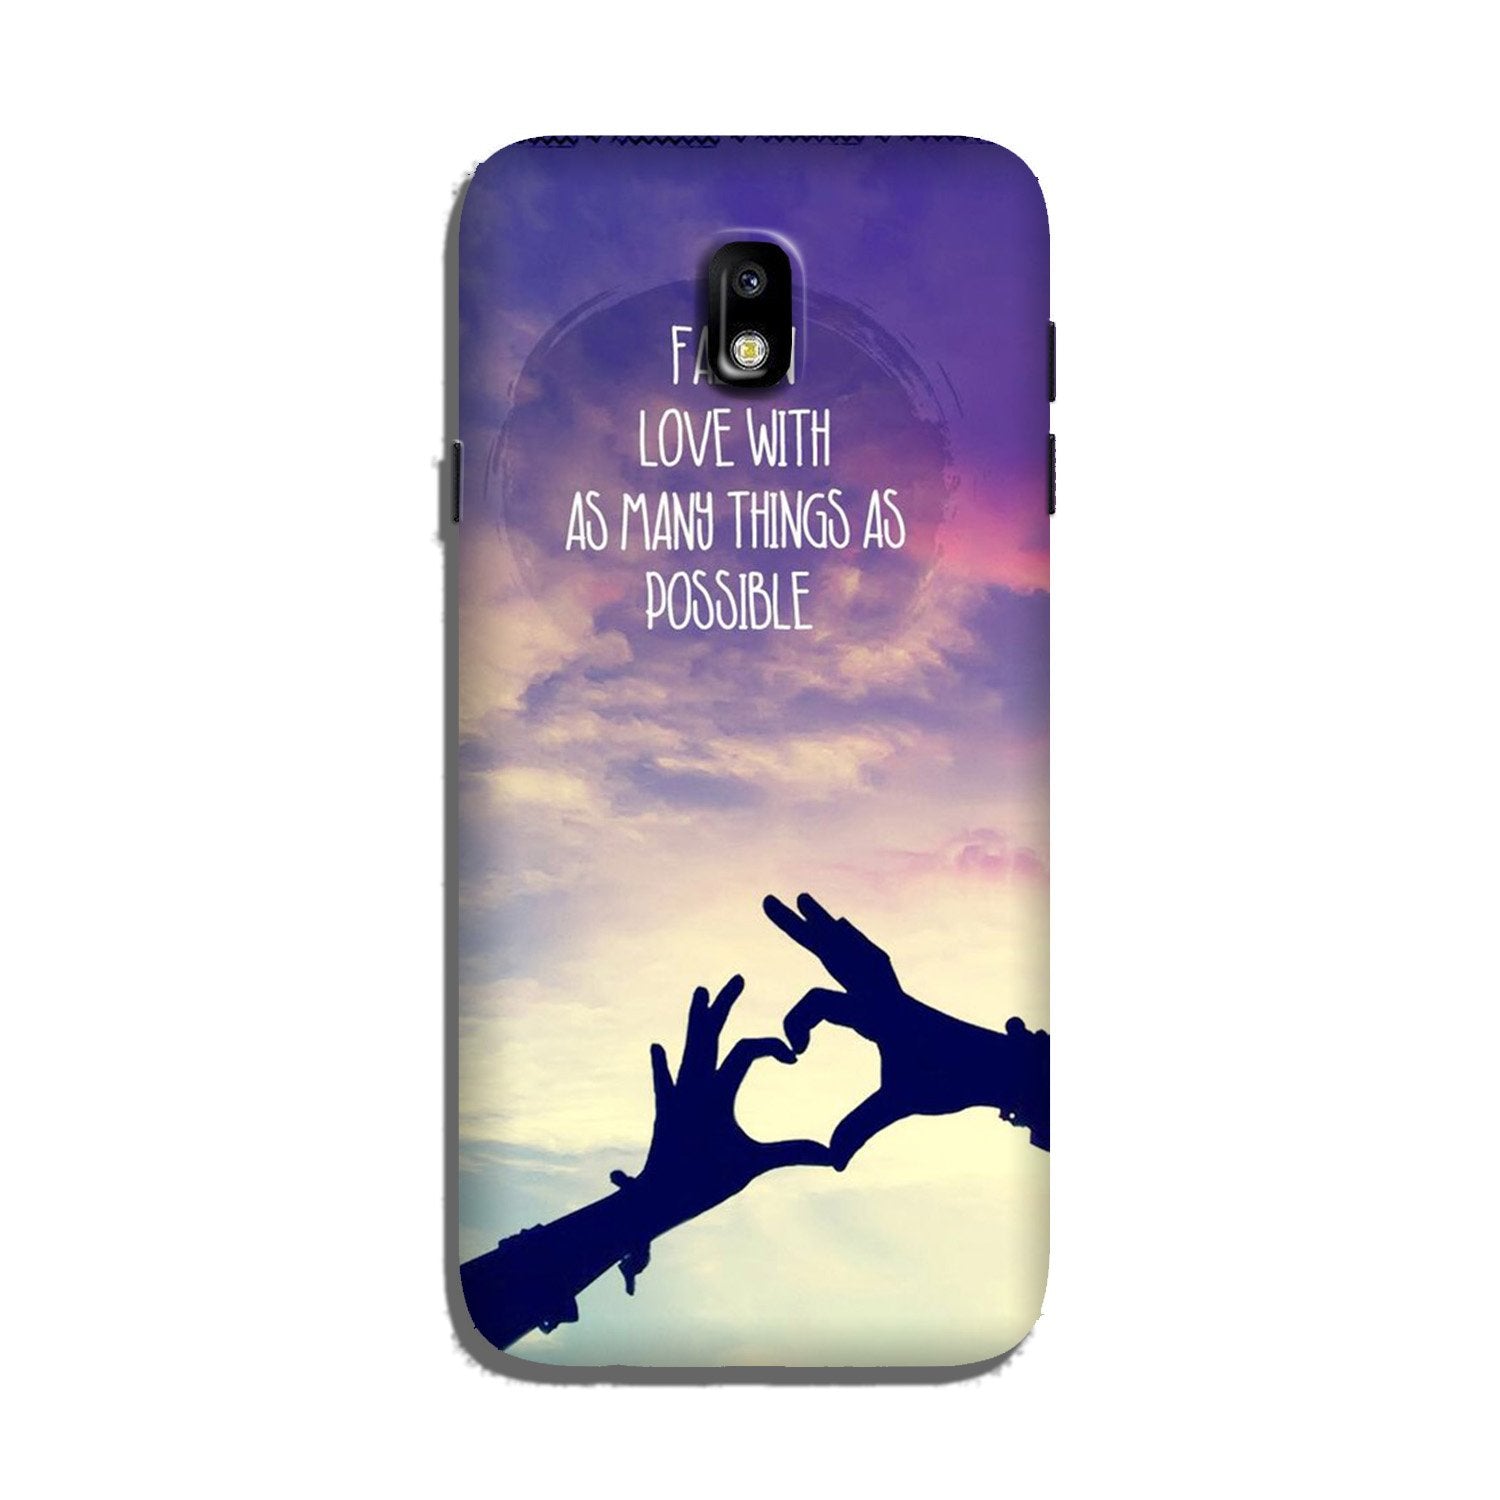 Fall in love Case for Galaxy J3 Pro